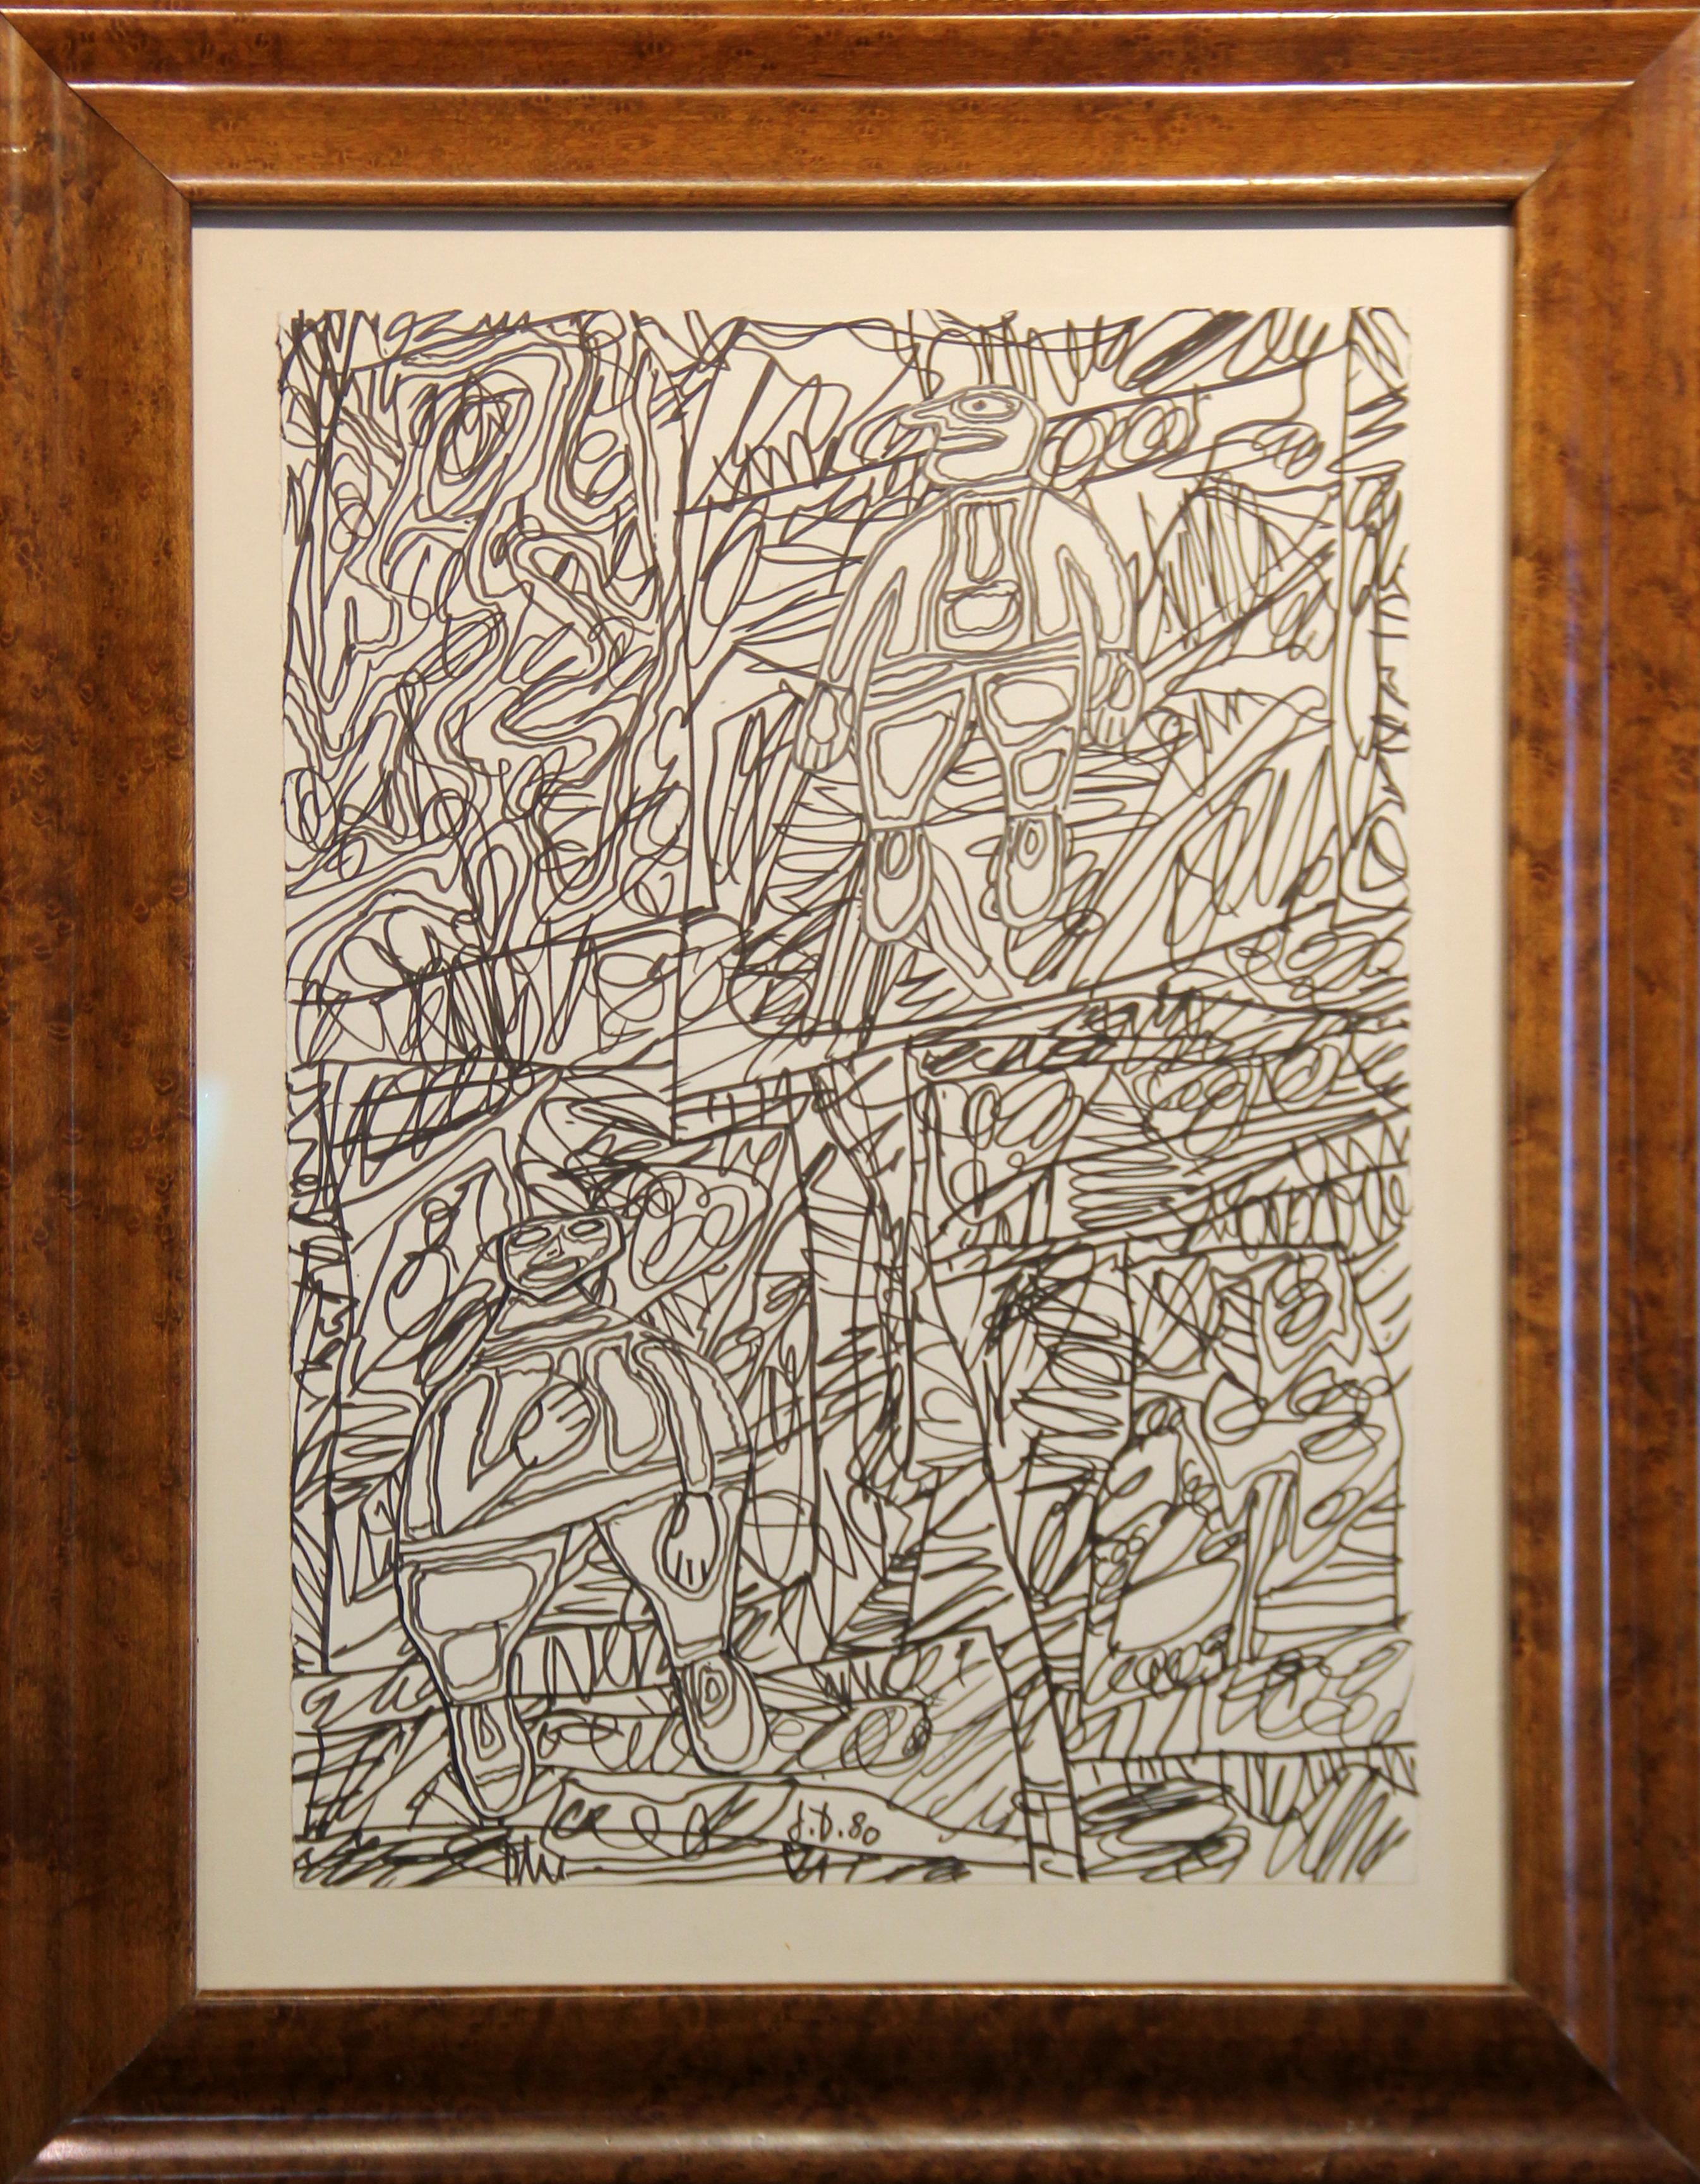 Jean Dubuffet Figurative Art – Jean DuBuffet, Site aux Figurines, Black Marker on Paper, Signed and Dated